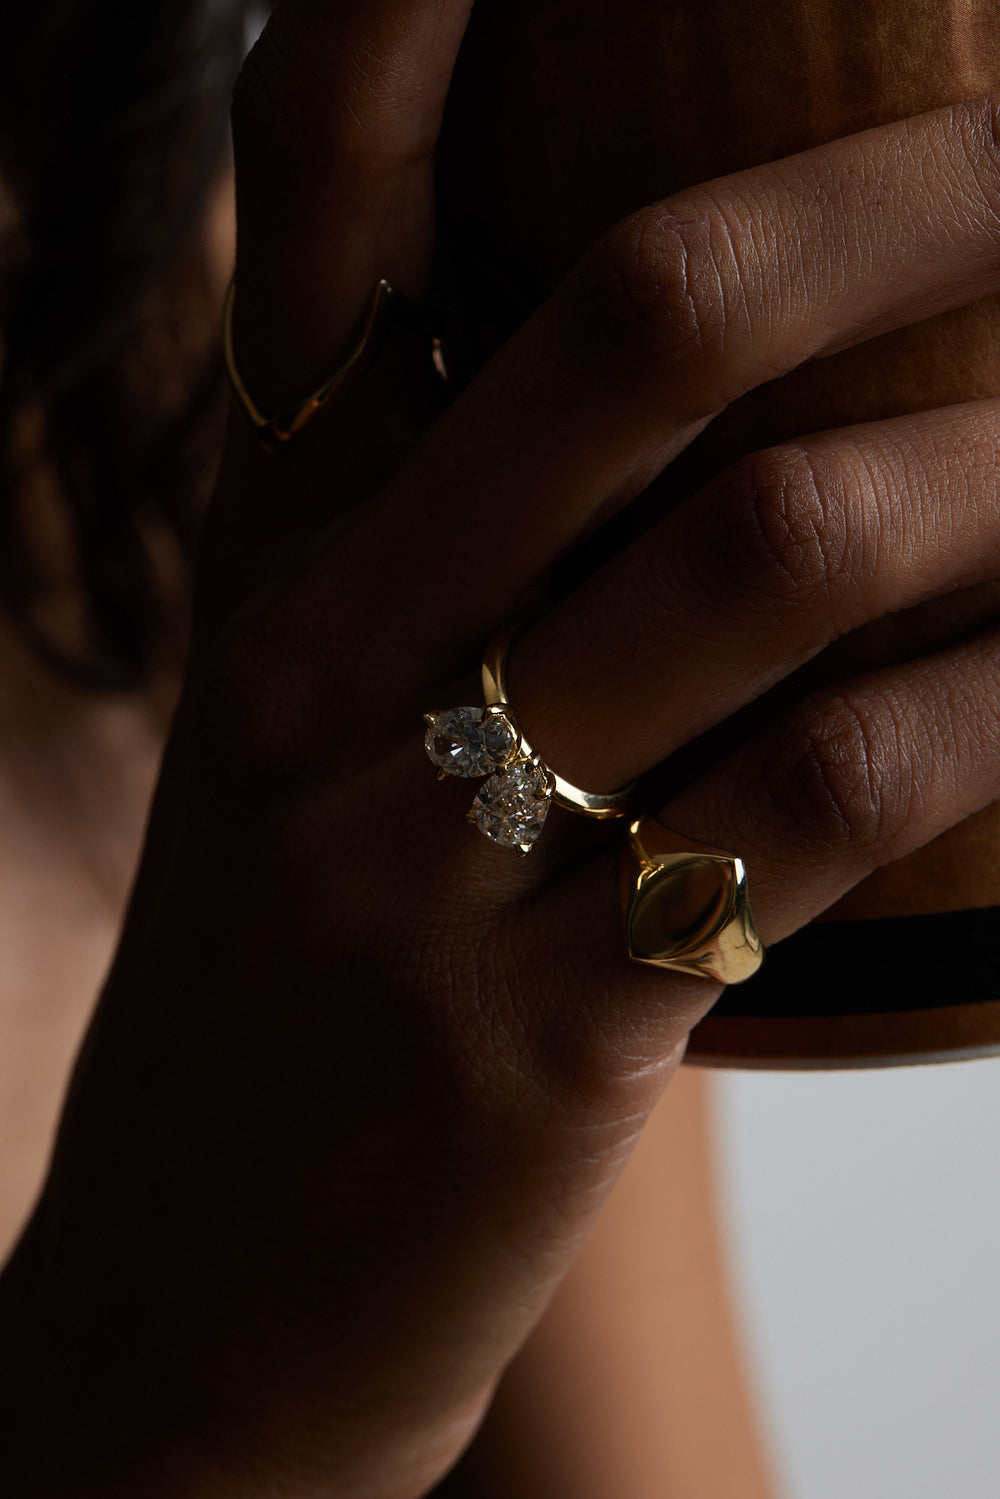 Marquise Signet Ring | Yellow Gold, More Options Available| Natasha Schweitzer